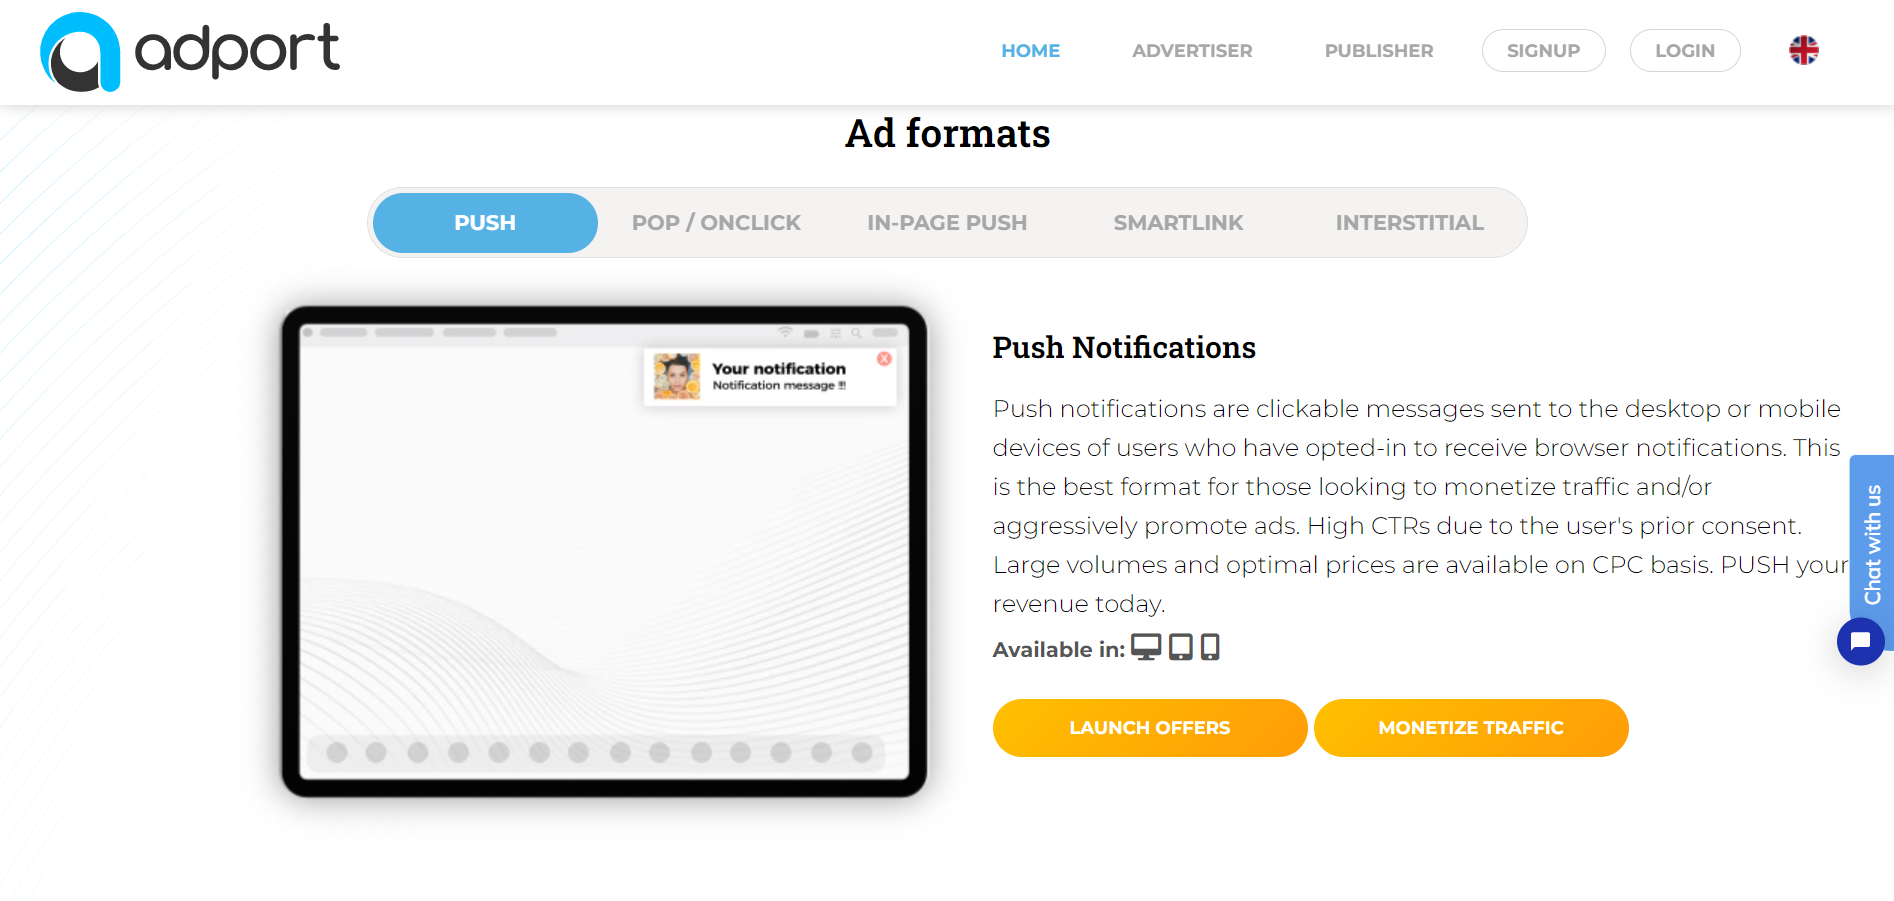 Adport.io - Supported Ad Formats